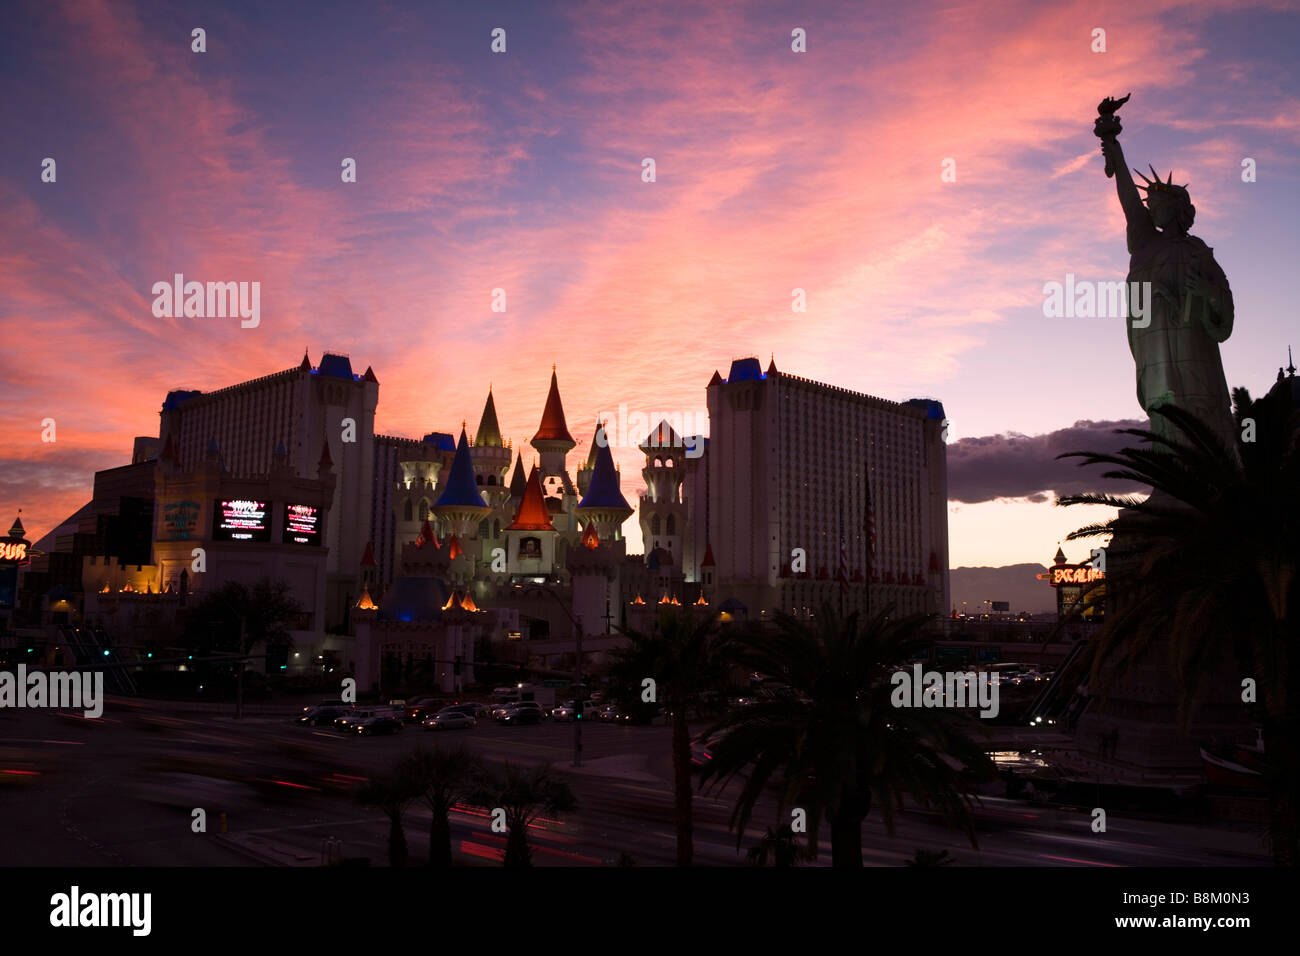 The Excalibur Hotel and casino and statue of liberty at sunset on the Las Vegas strip, Nevada, USA Stock Photo